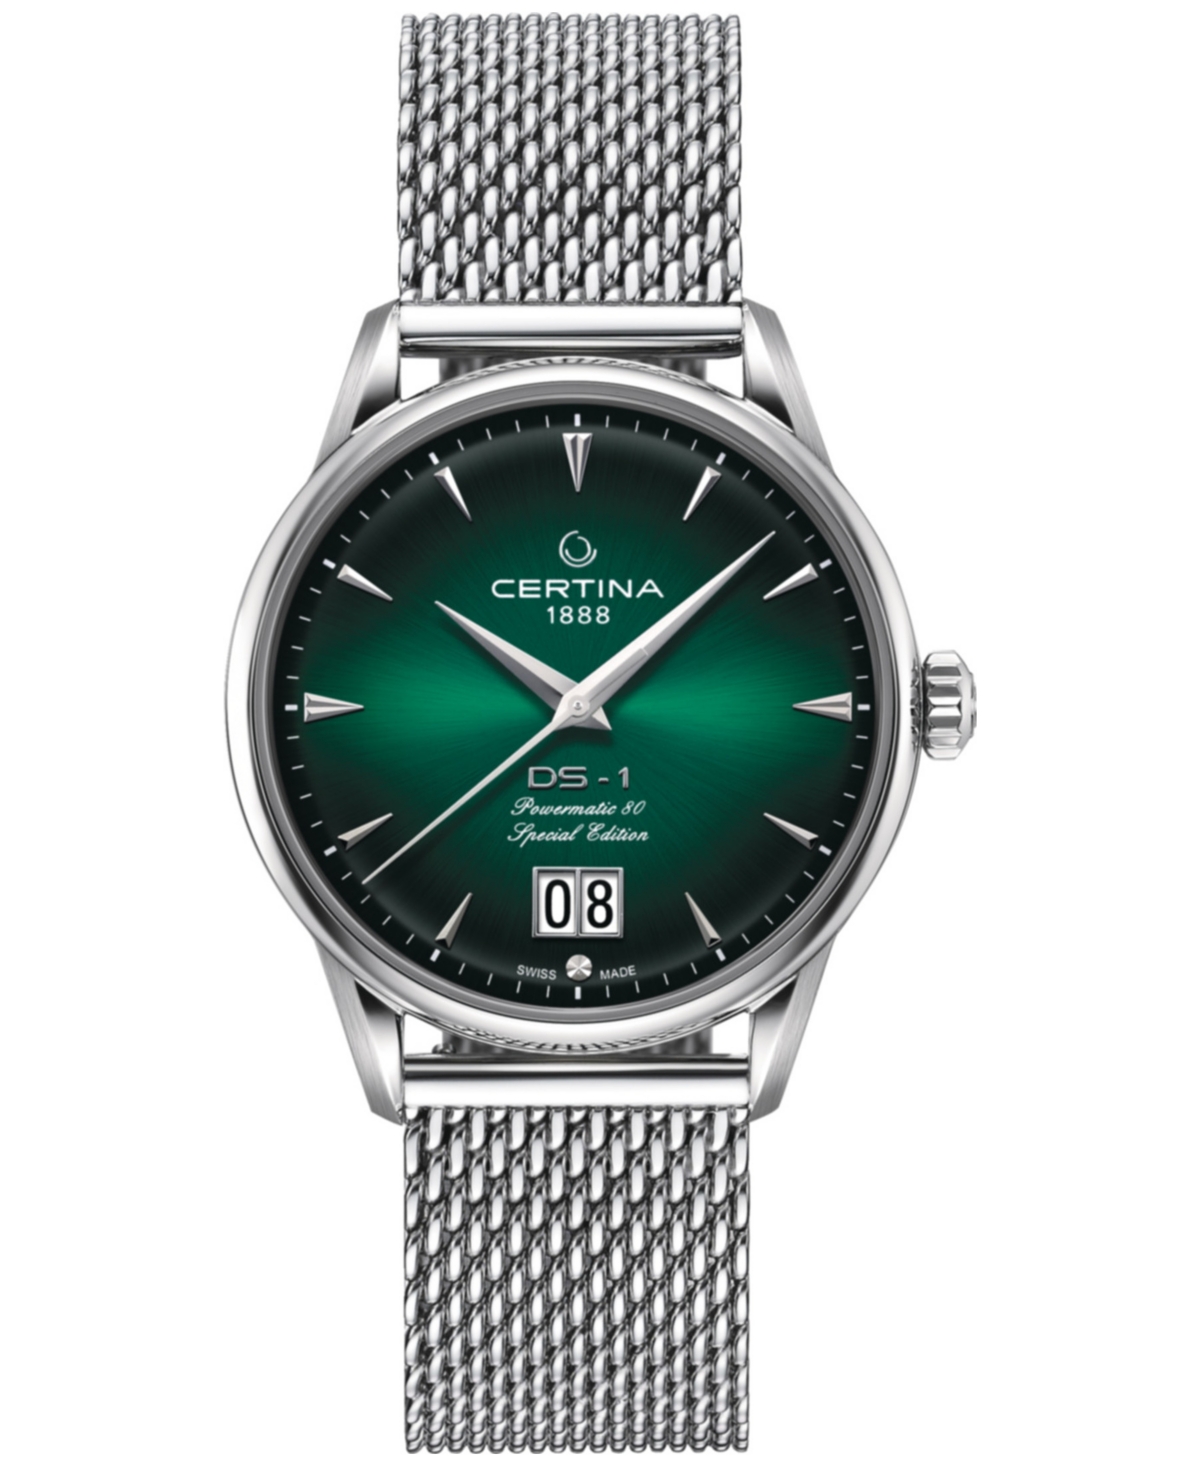 Certina Men's Swiss Automatic Ds-1 Big Date Stainless Steel Mesh Bracelet Watch 41mm In Green